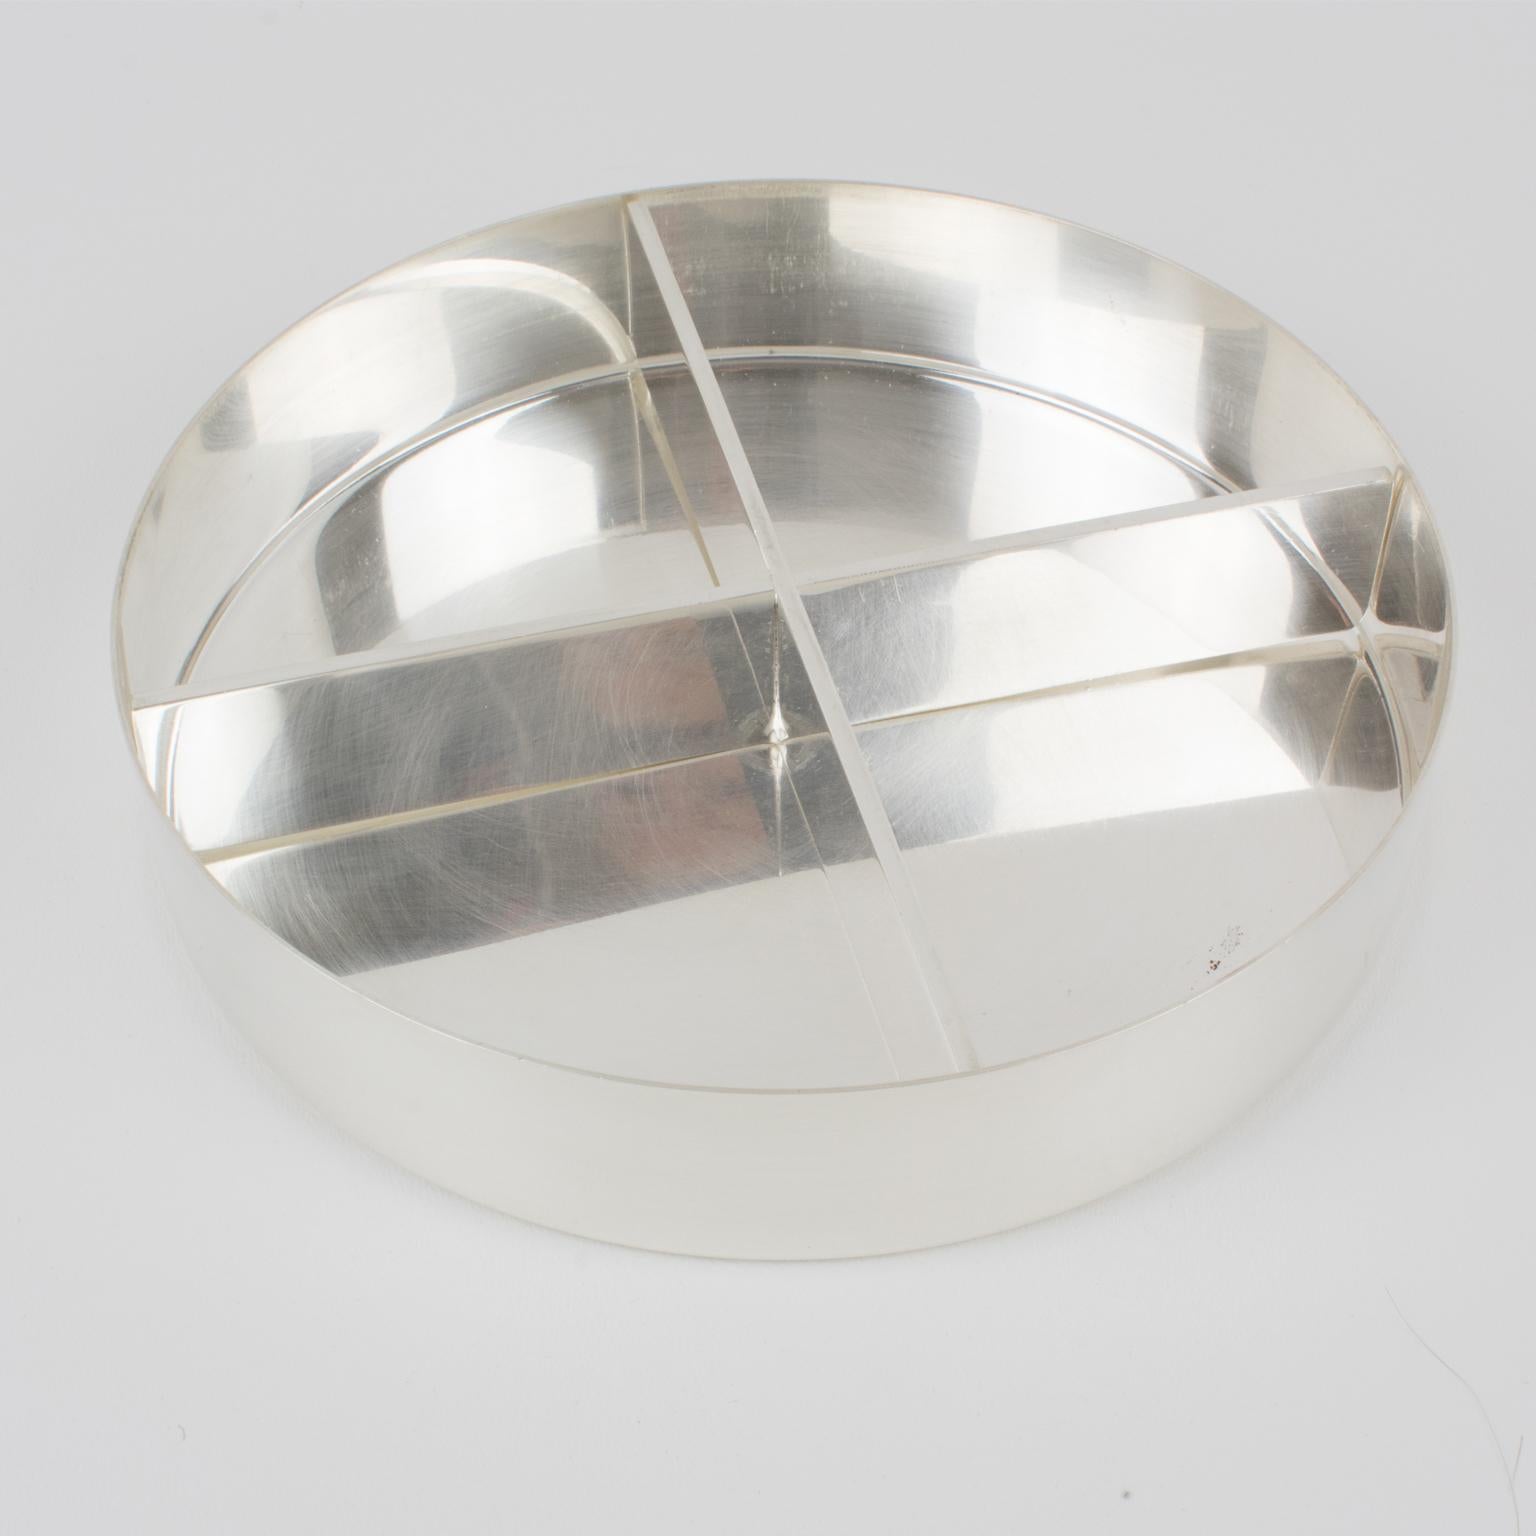 Metal Mellerio Paris Silver Plate and Lucite Round Box, 1970s